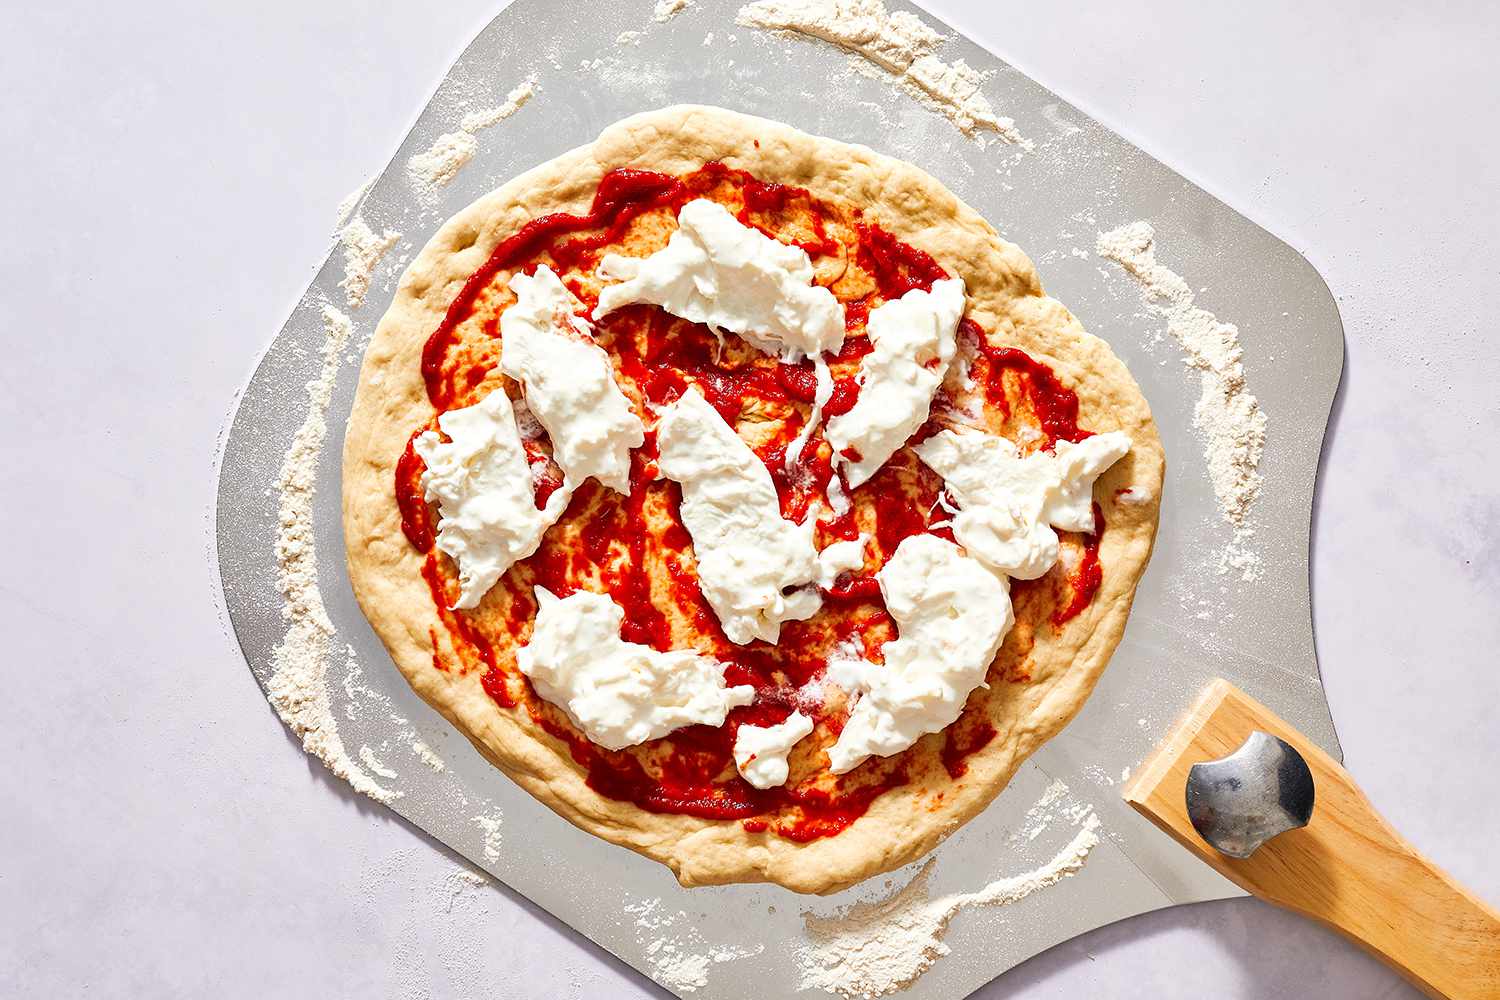 Pizza dough with tomato sauce and burrata cheese on a pizza peel